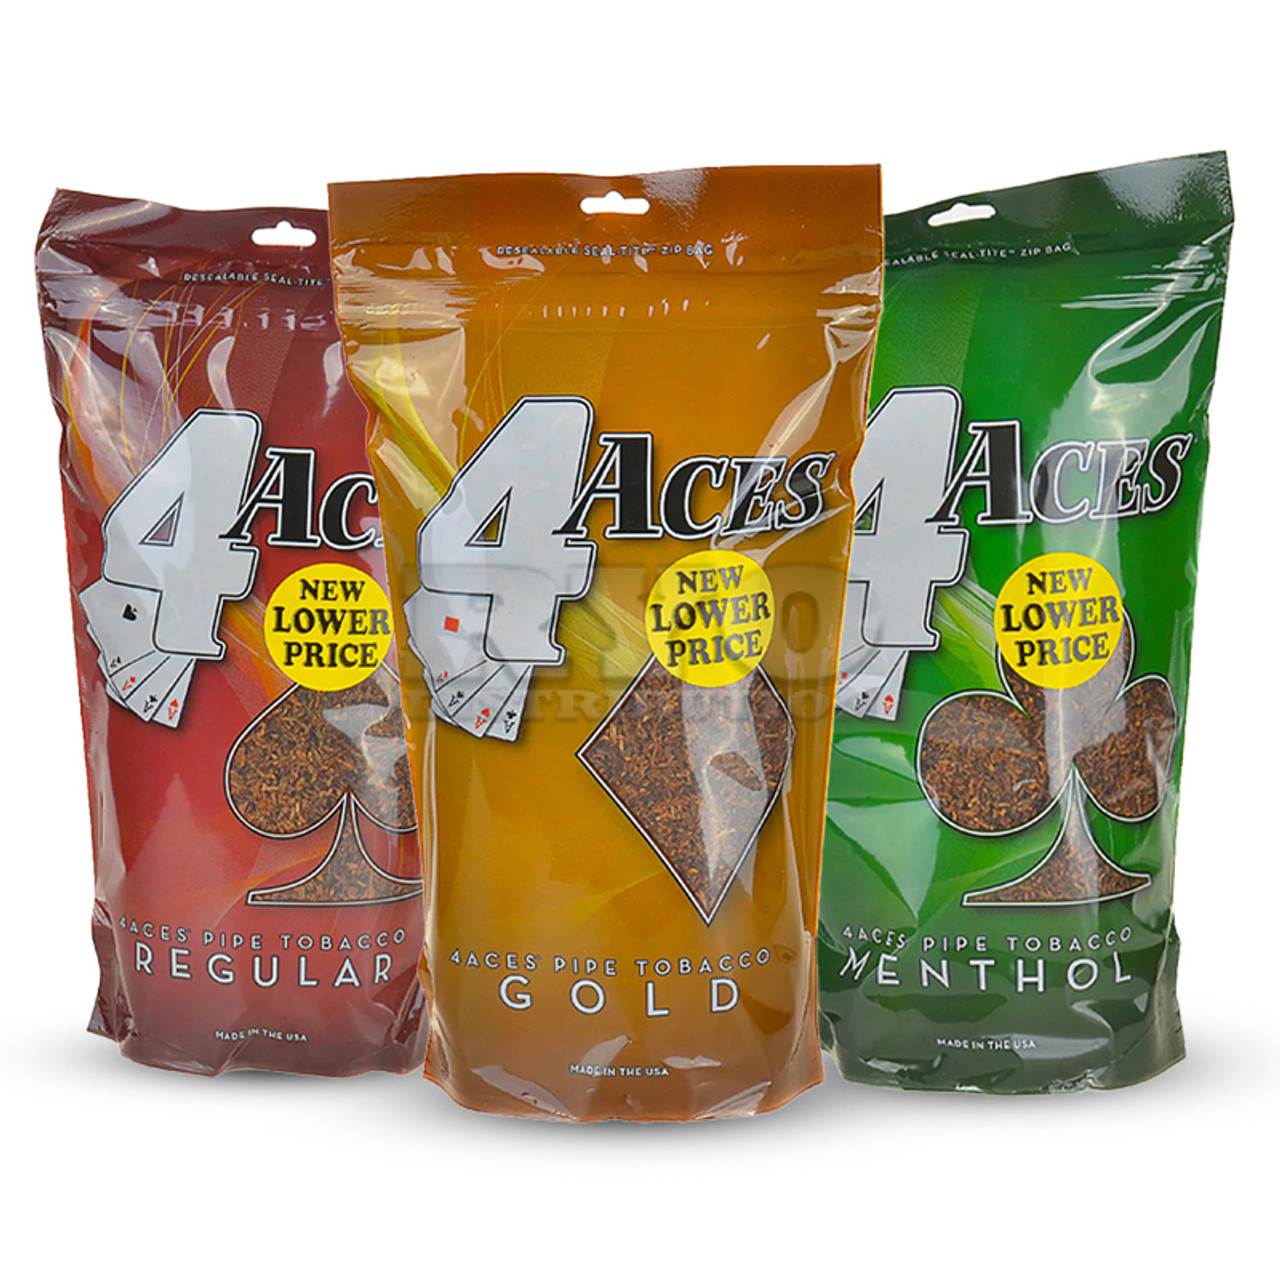 Bags of 4 Aces Pipe Tobacco - 16oz - Windy City Cigars